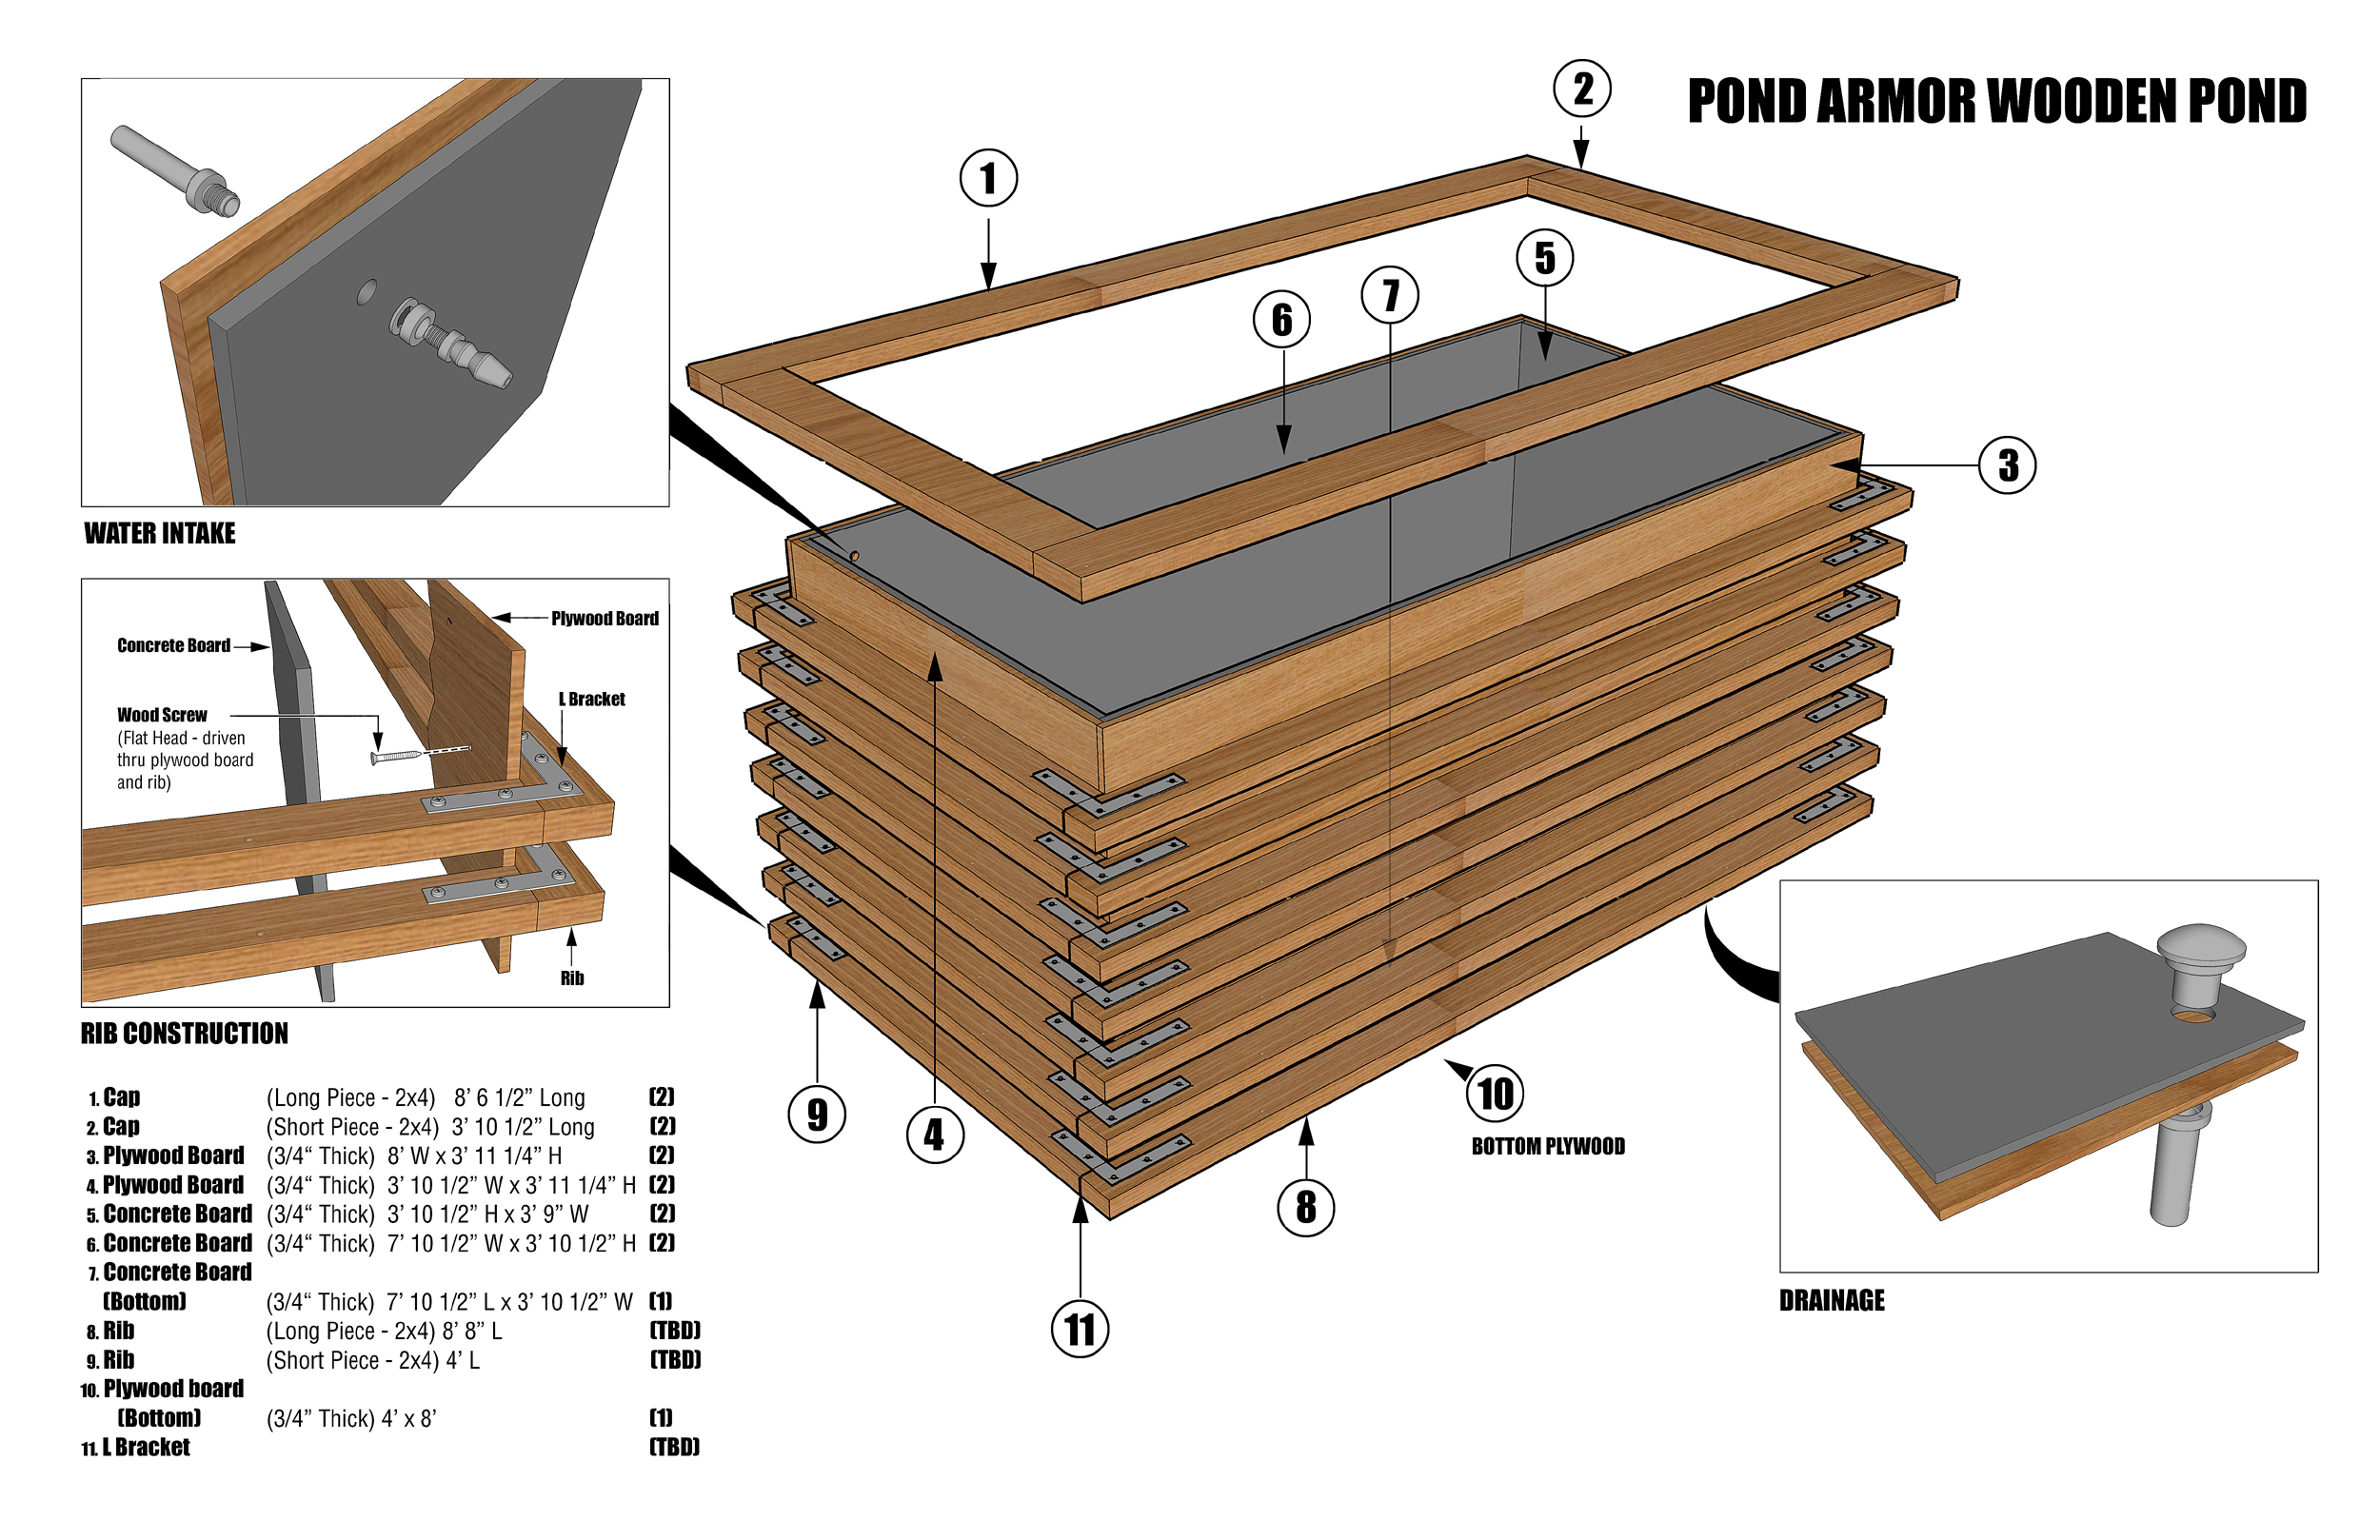 Building a Wooden Pond or Tank